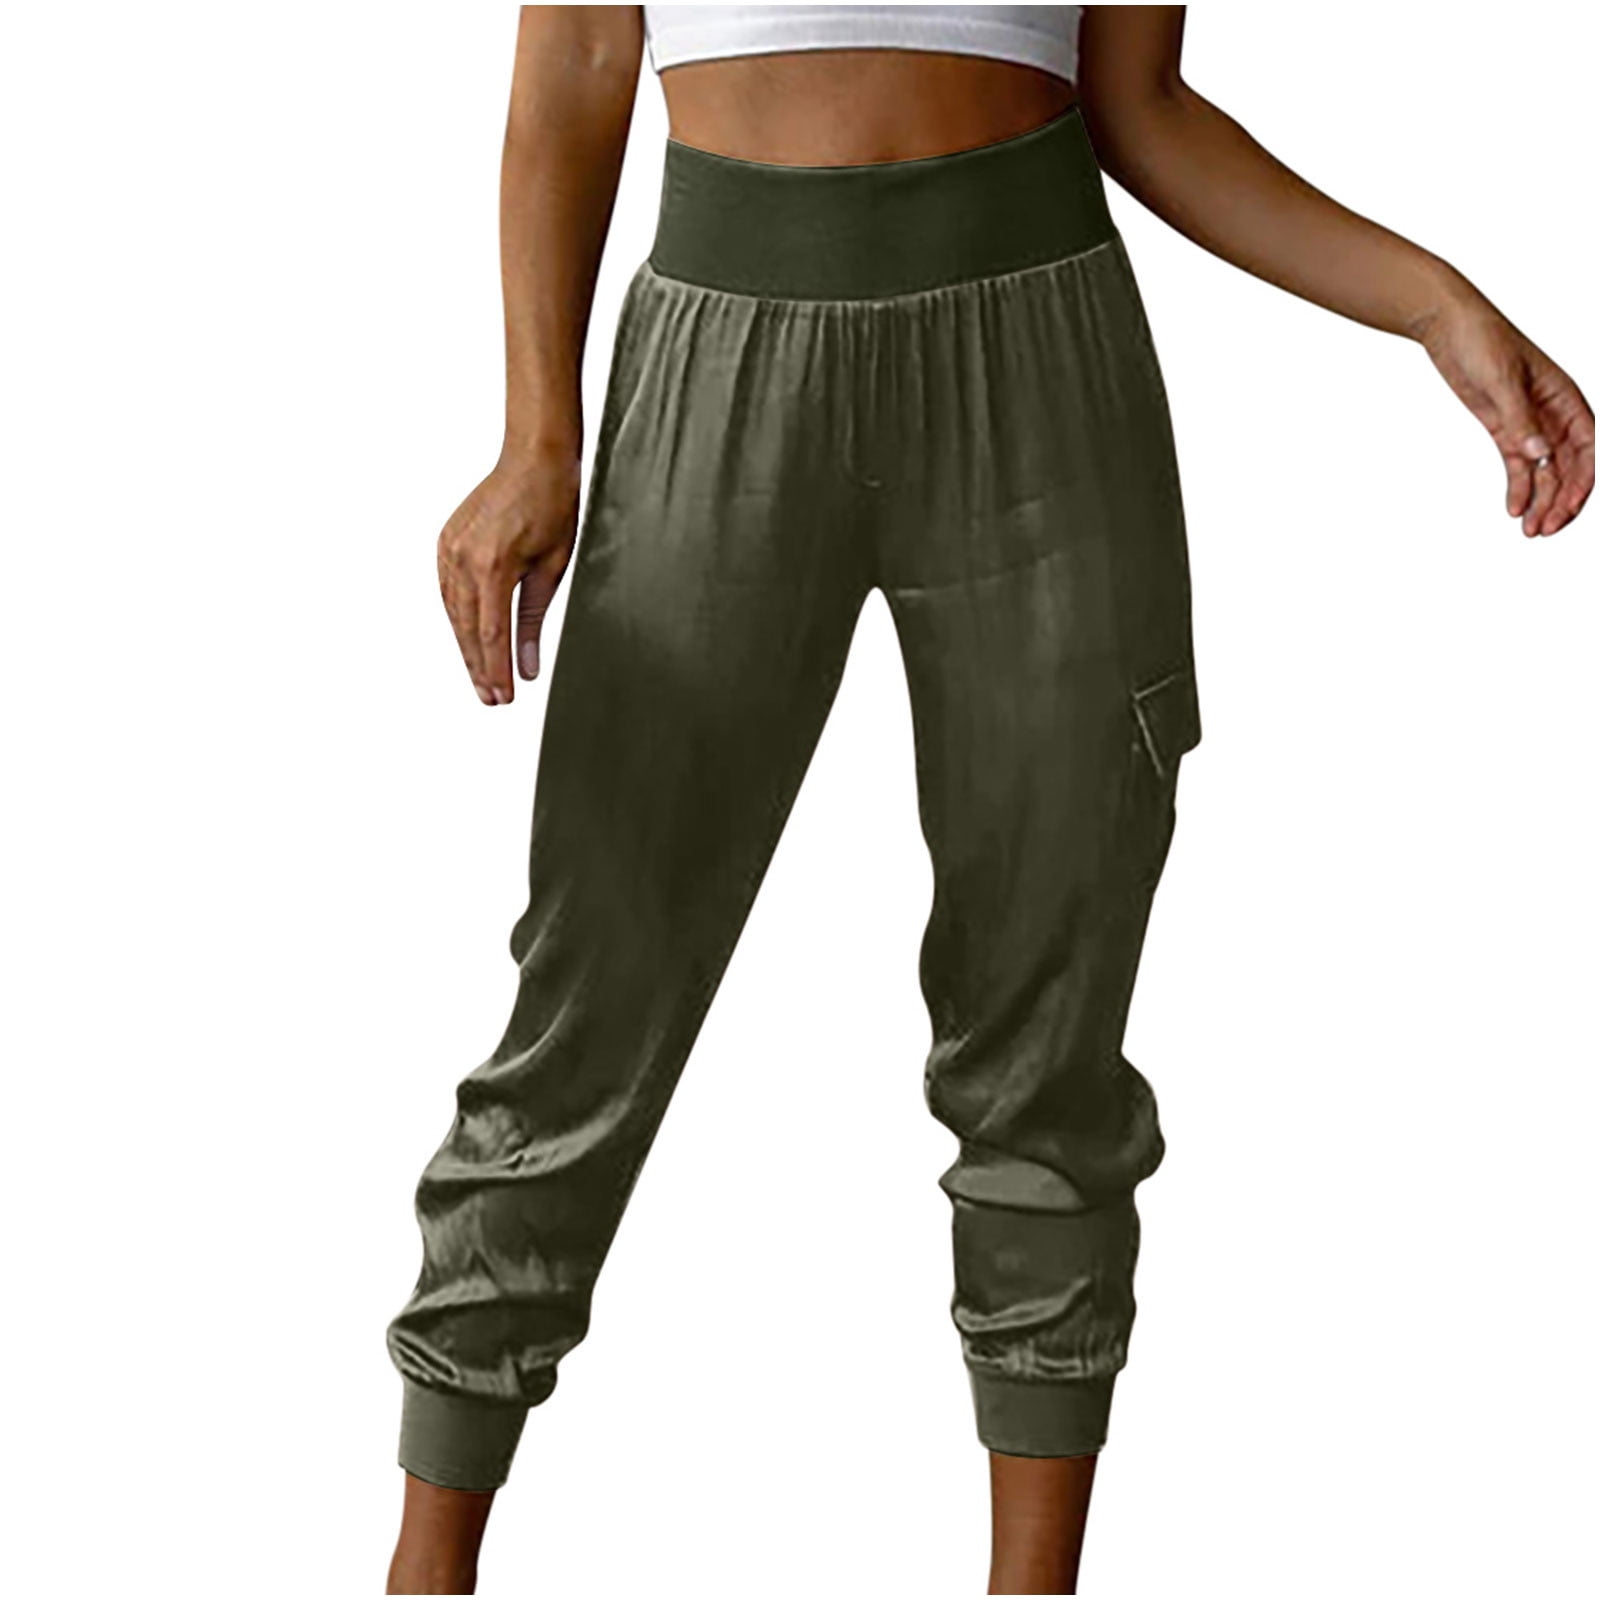  Willit Women's Joggers Pants Athletic Sweatpants Lightweight  Sports Running Track Pants with Pockets Gray M : Clothing, Shoes & Jewelry